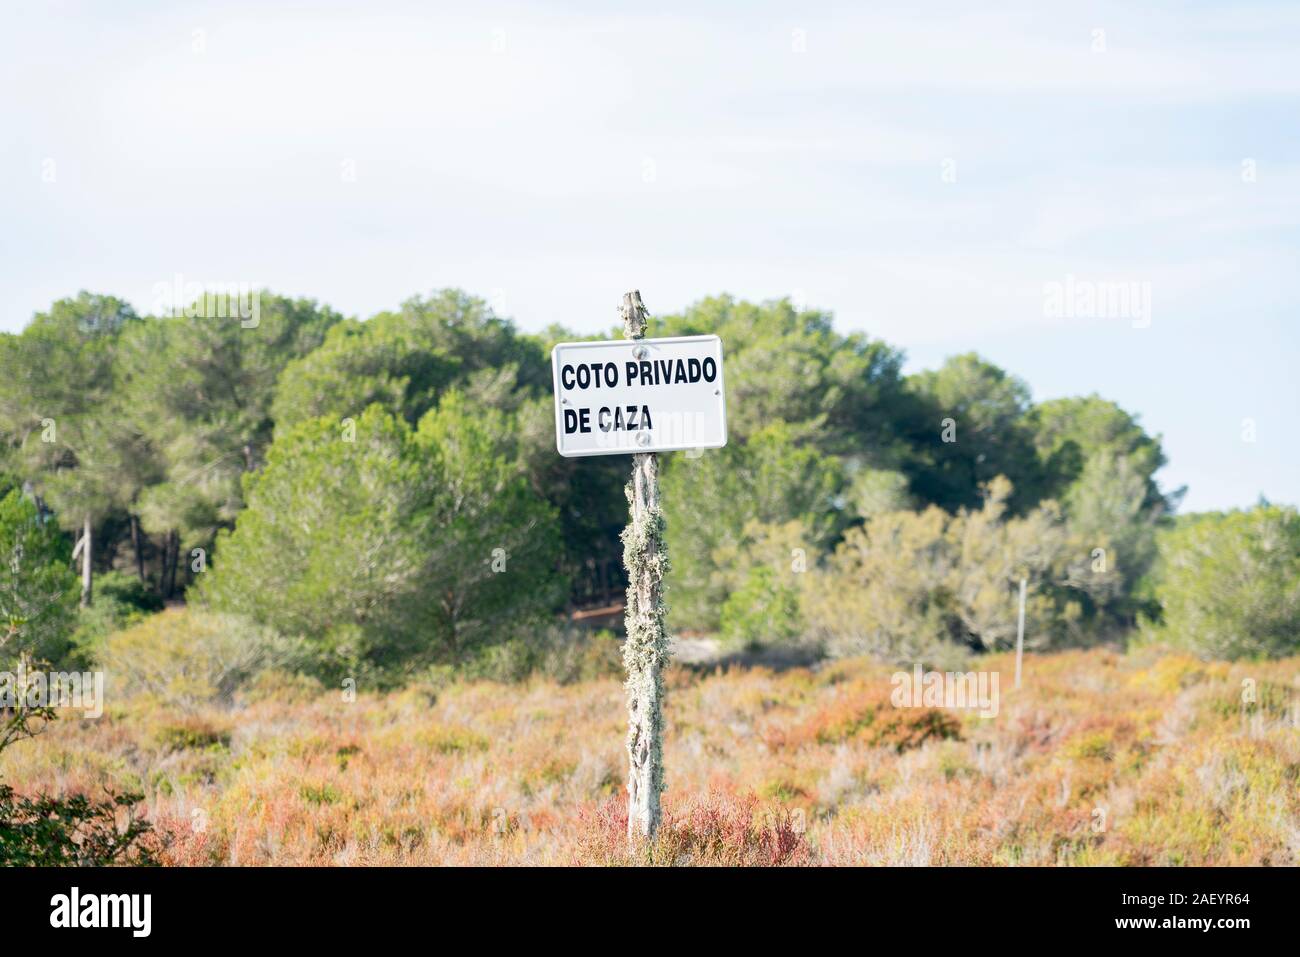 Coto privado de caza - Signboard with spanish words for private hunting ground. Natural park Es Trenc, Majorca. Landscape with several vegetation. Stock Photo